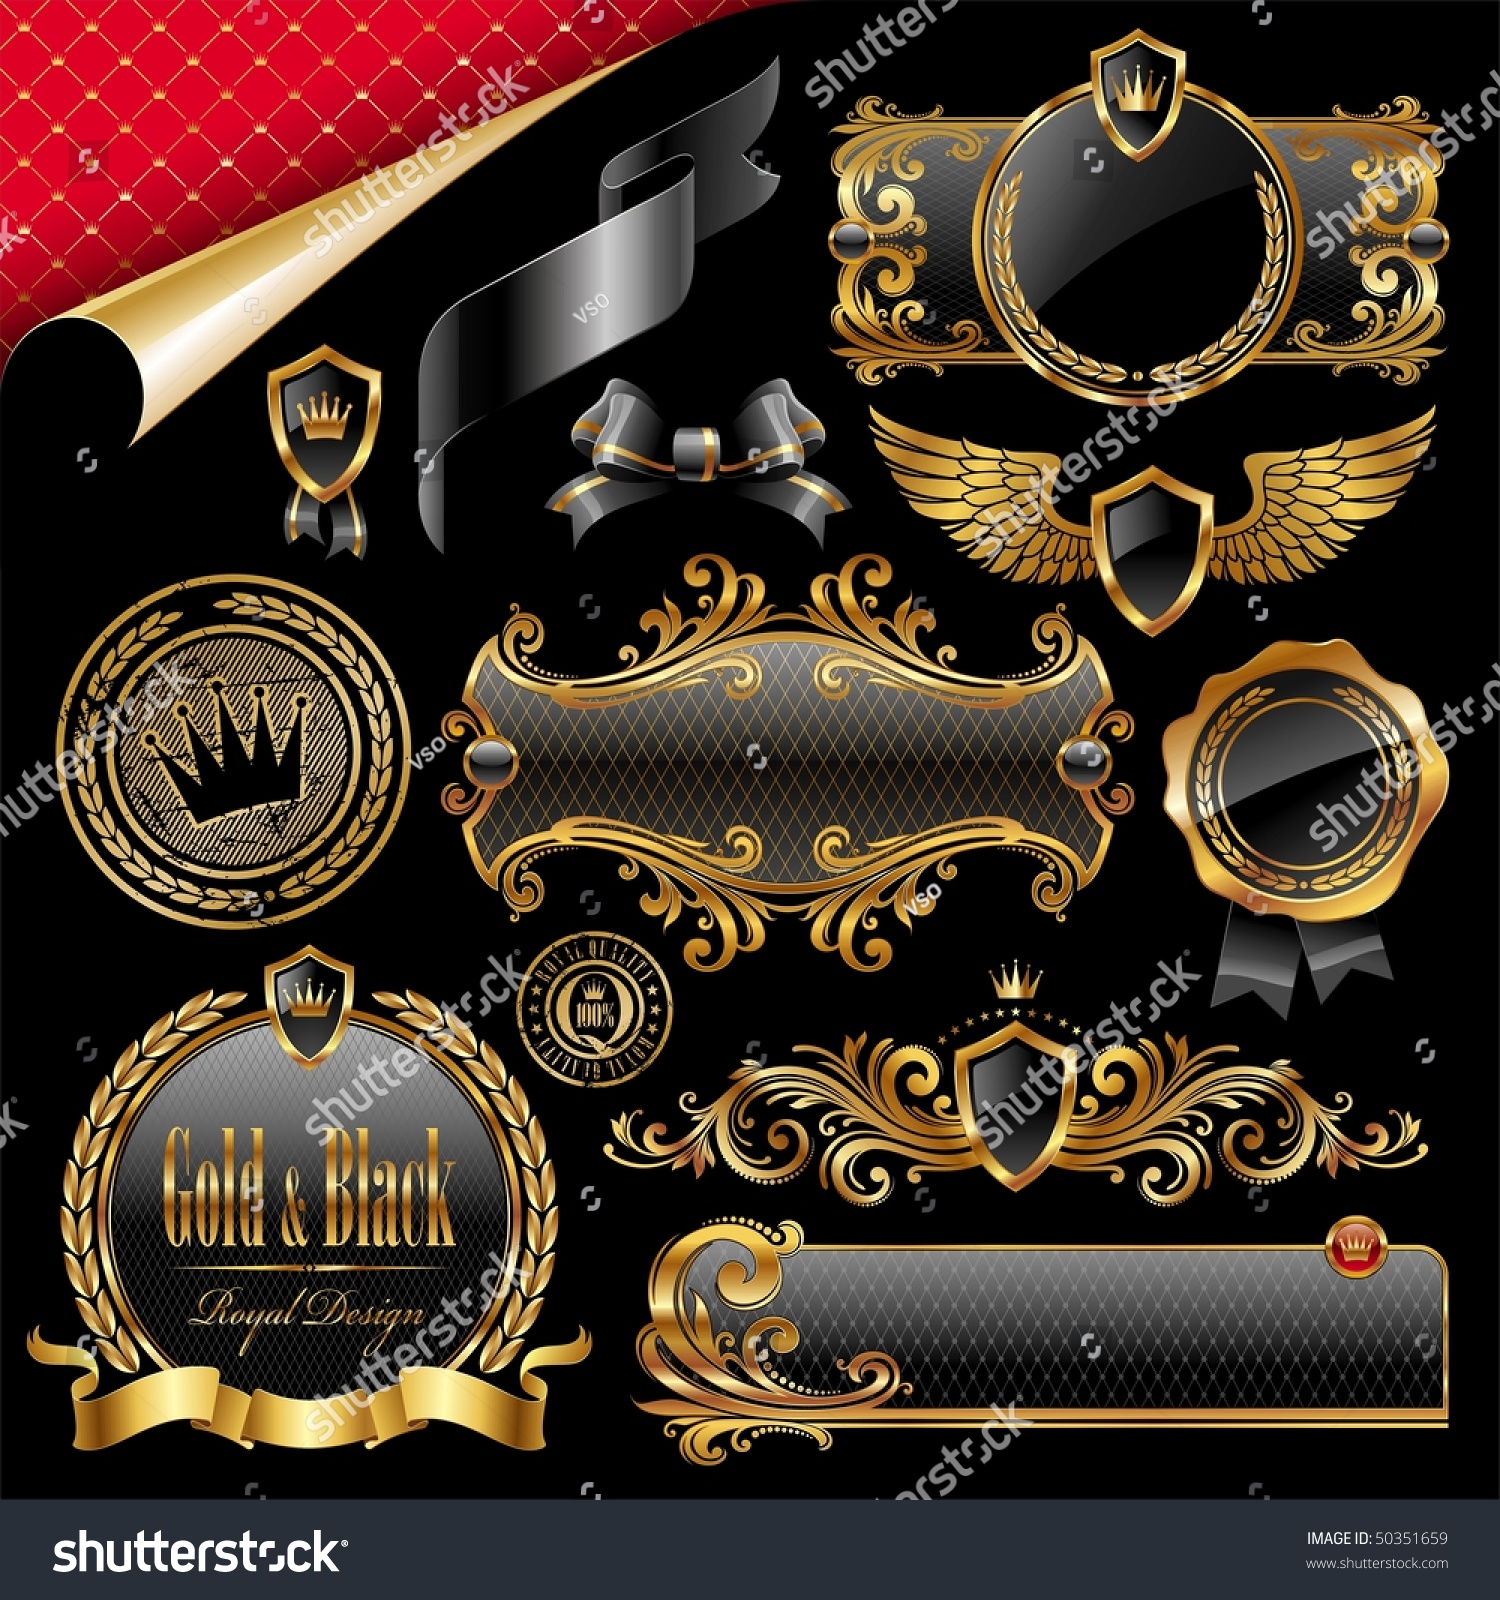 Set Of Royal Gold And Black Design Elements Stock Vector 50351659 ...